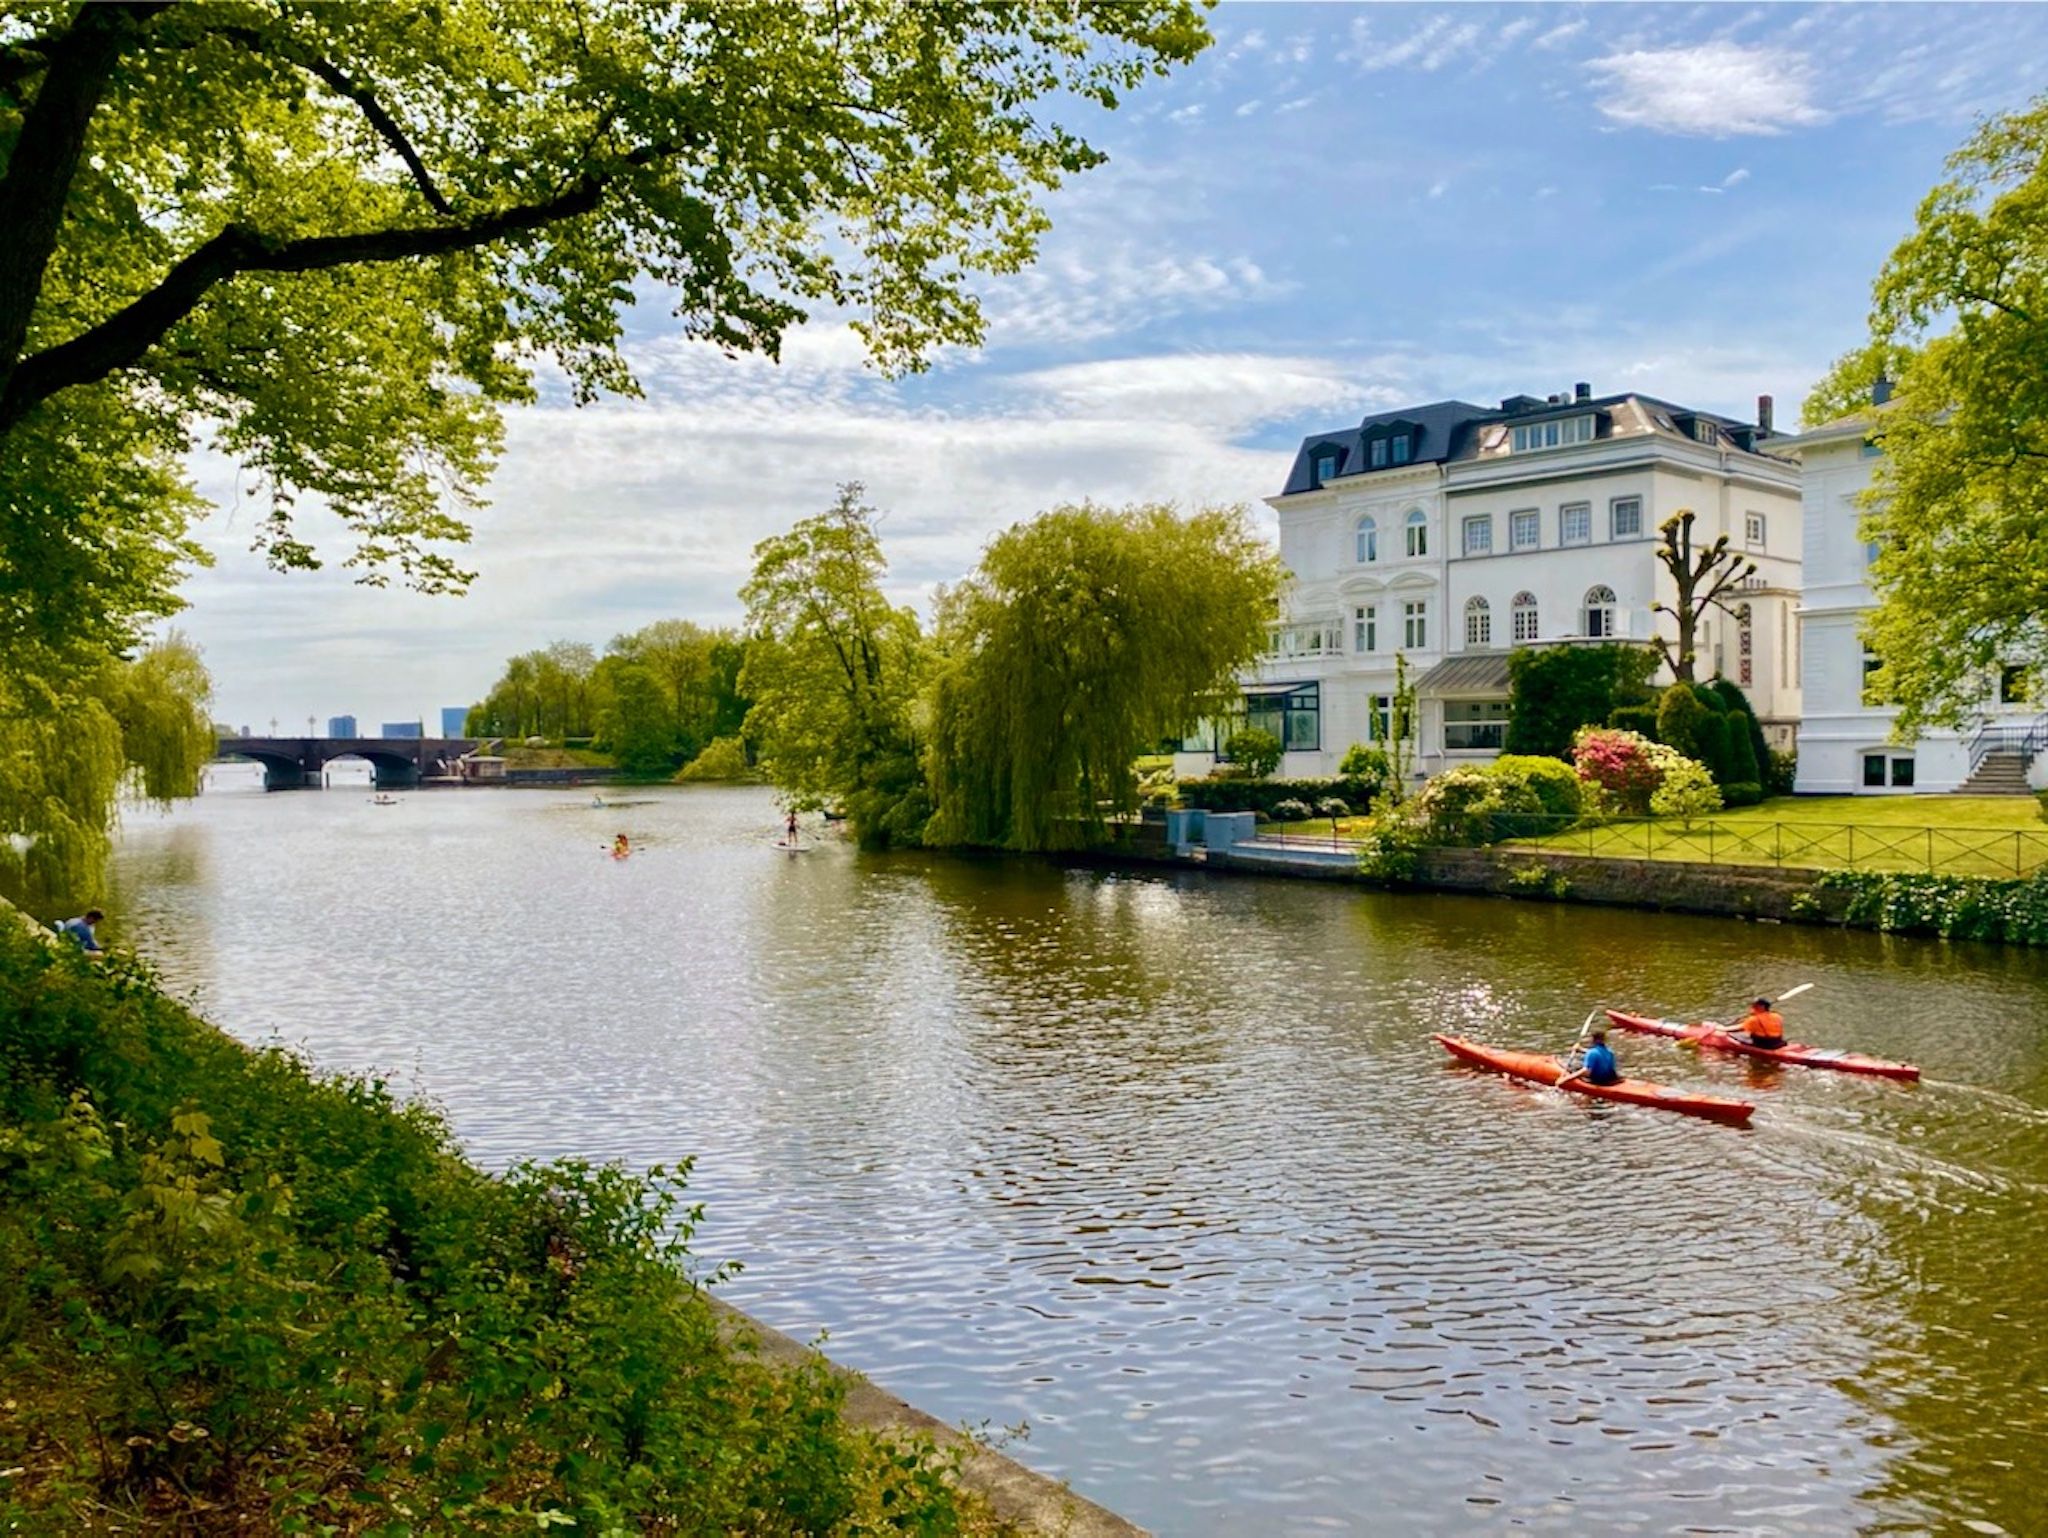 In summer, the Alster is simply incredibly versatile for water sports enthusiasts. Photo: Sascha Tegtmeyer